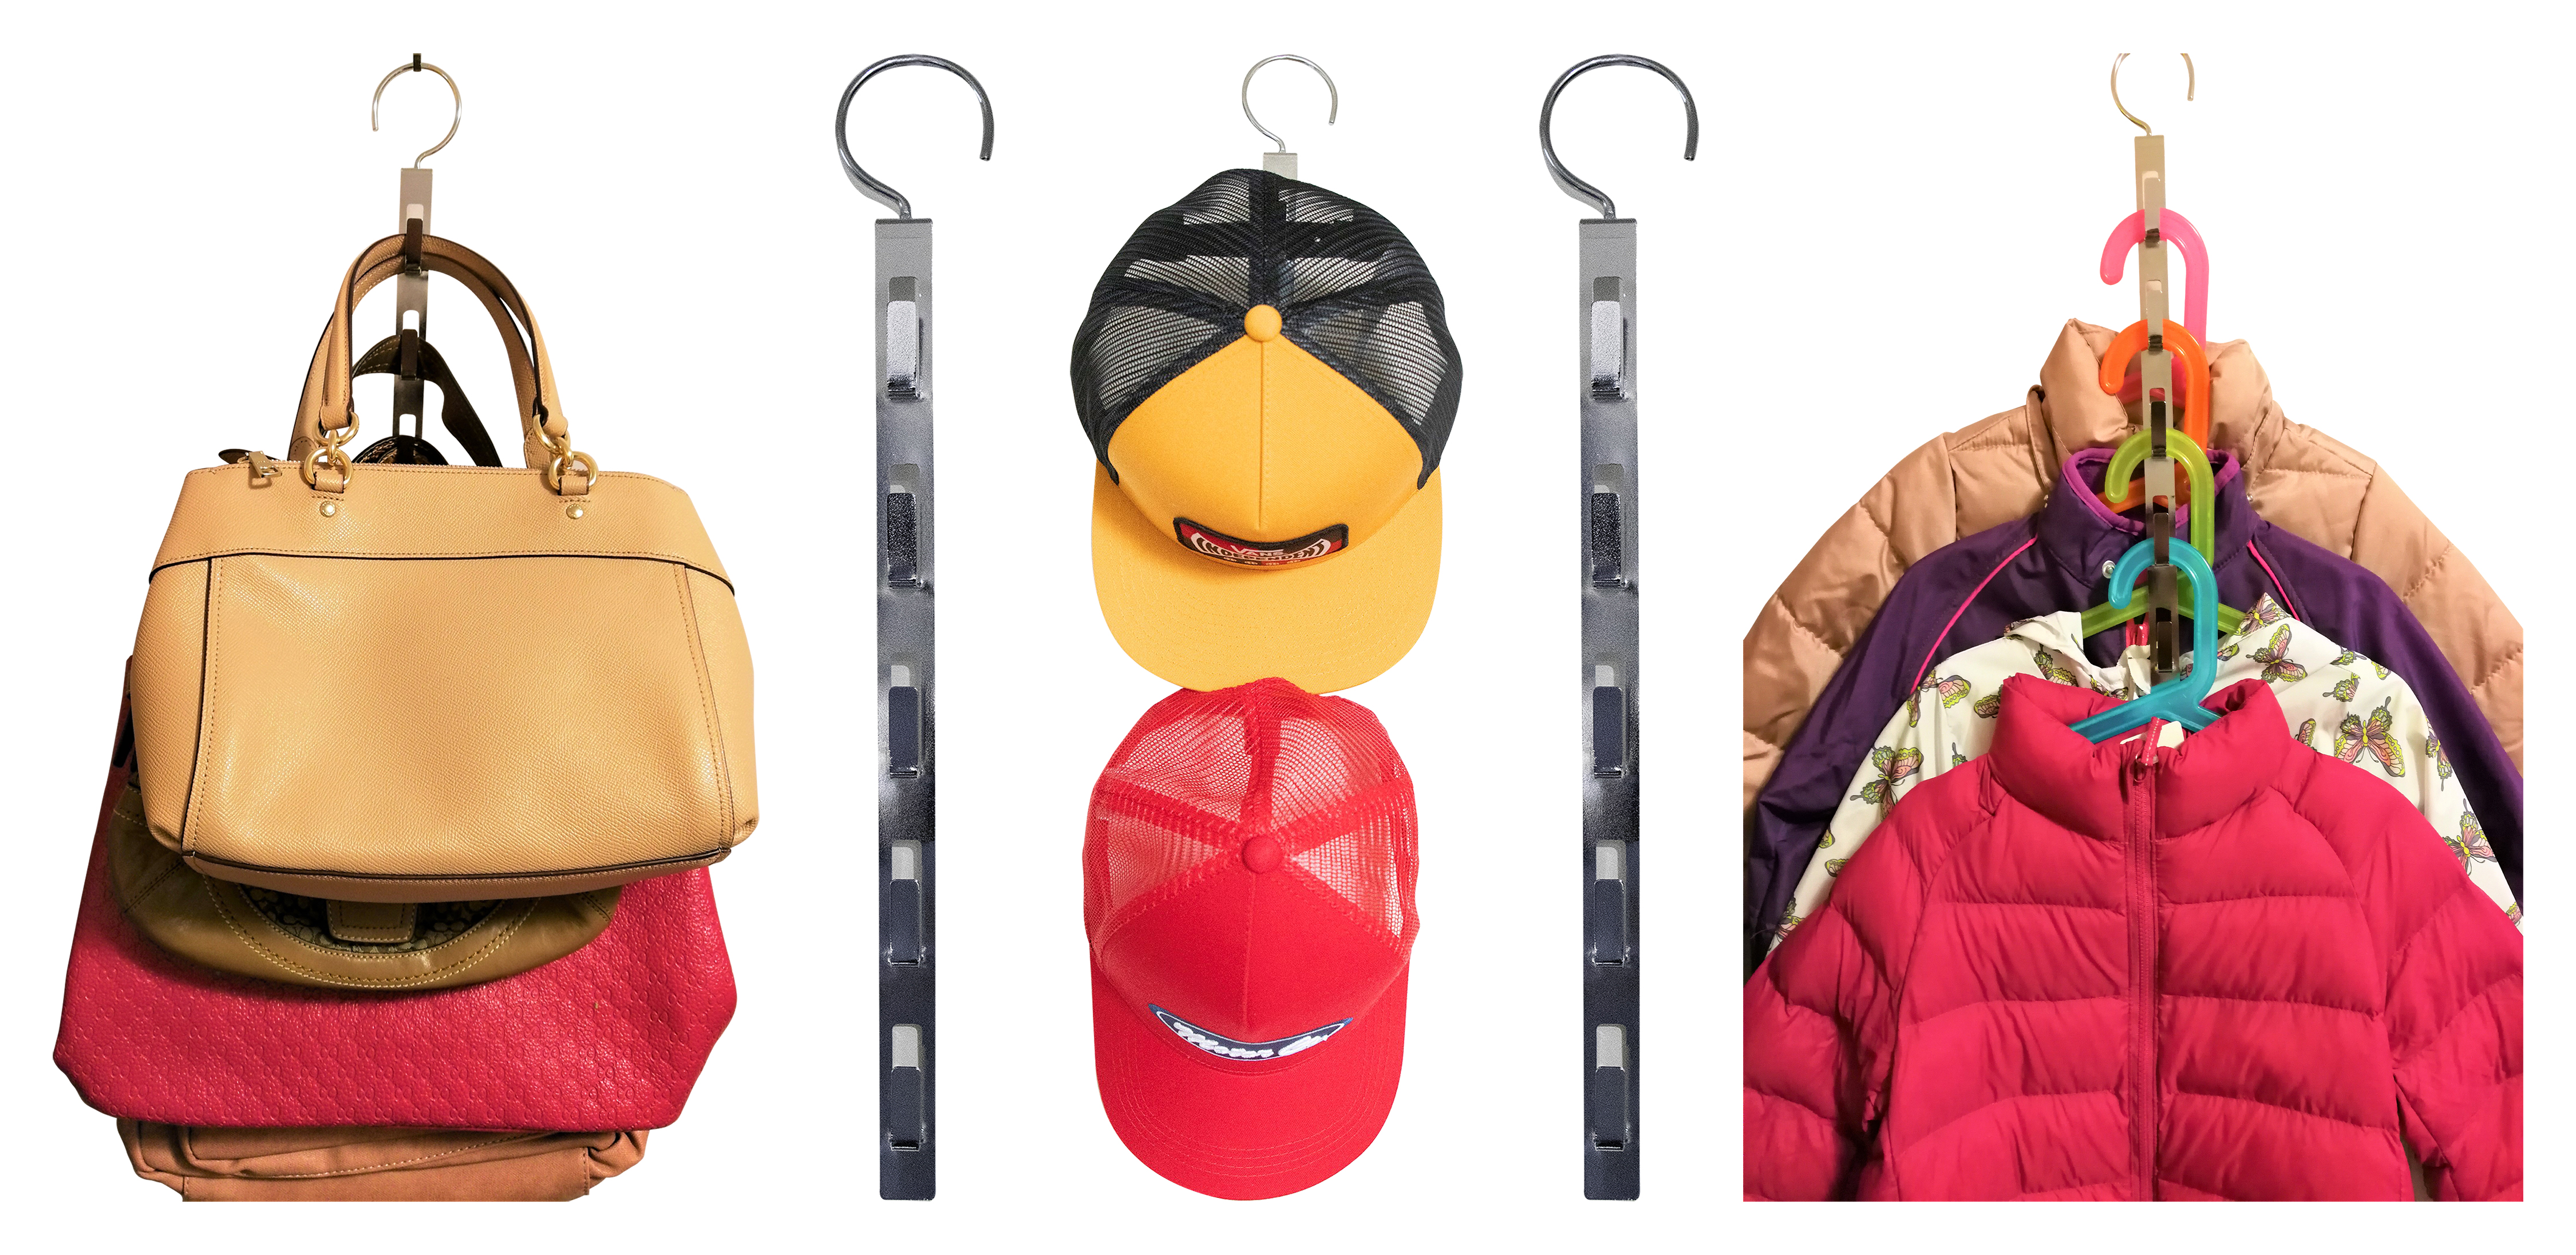 D'klutz multifuntional hanger that hangs bags, caps, kids' jackets (colorful)